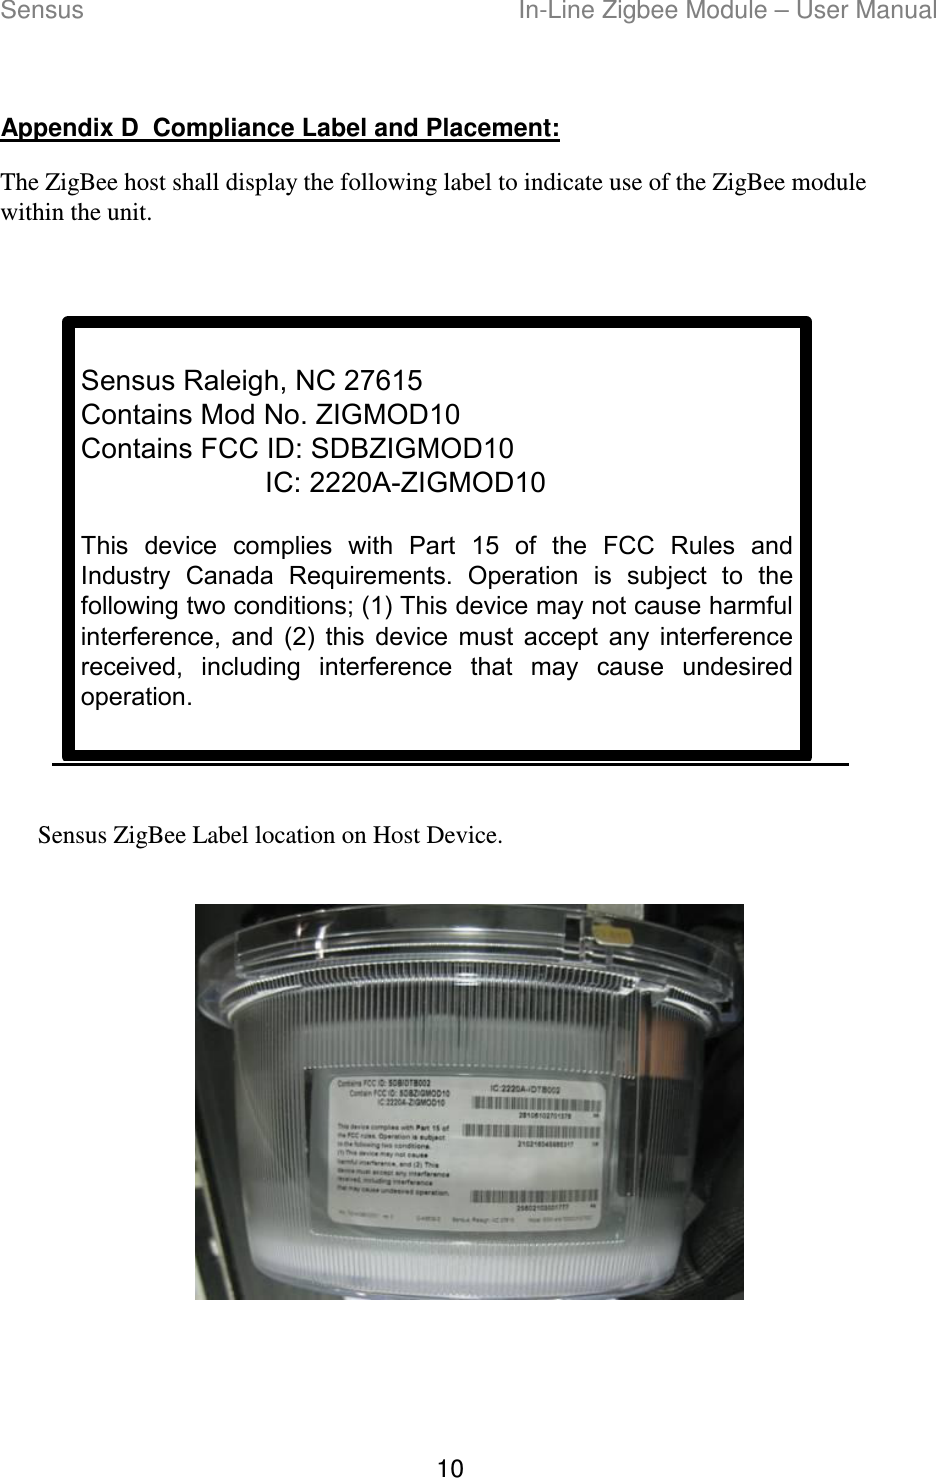 Sensus  In-Line Zigbee Module – User Manual 10  Appendix D  Compliance Label and Placement: The ZigBee host shall display the following label to indicate use of the ZigBee module within the unit.  Sensus Raleigh, NC 27615Contains Mod No. ZIGMOD10Contains FCC ID: SDBZIGMOD10IC: 2220A-ZIGMOD10This  device  complies  with  Part  15  of  the  FCC  Rules  and Industry  Canada  Requirements.  Operation  is  subject  to  the following two conditions; (1) This device may not cause harmful interference,  and  (2)  this  device  must  accept  any  interference received,  including  interference  that  may  cause  undesired operation.  Sensus ZigBee Label location on Host Device.     